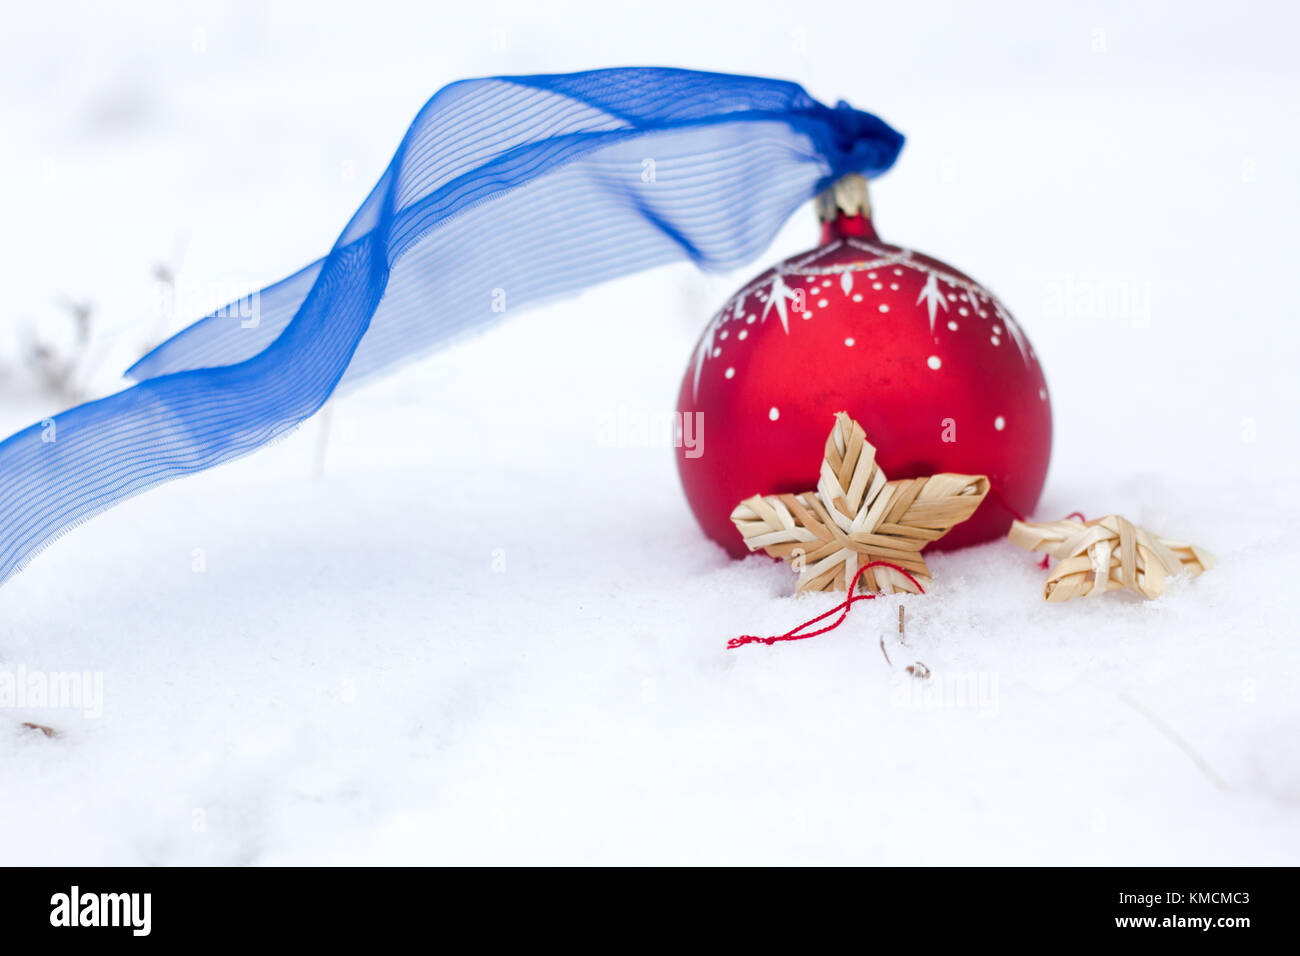 Red christmas toy: red Ball and wattle straw star and angel decor on snow. Winter holiday background Stock Photo